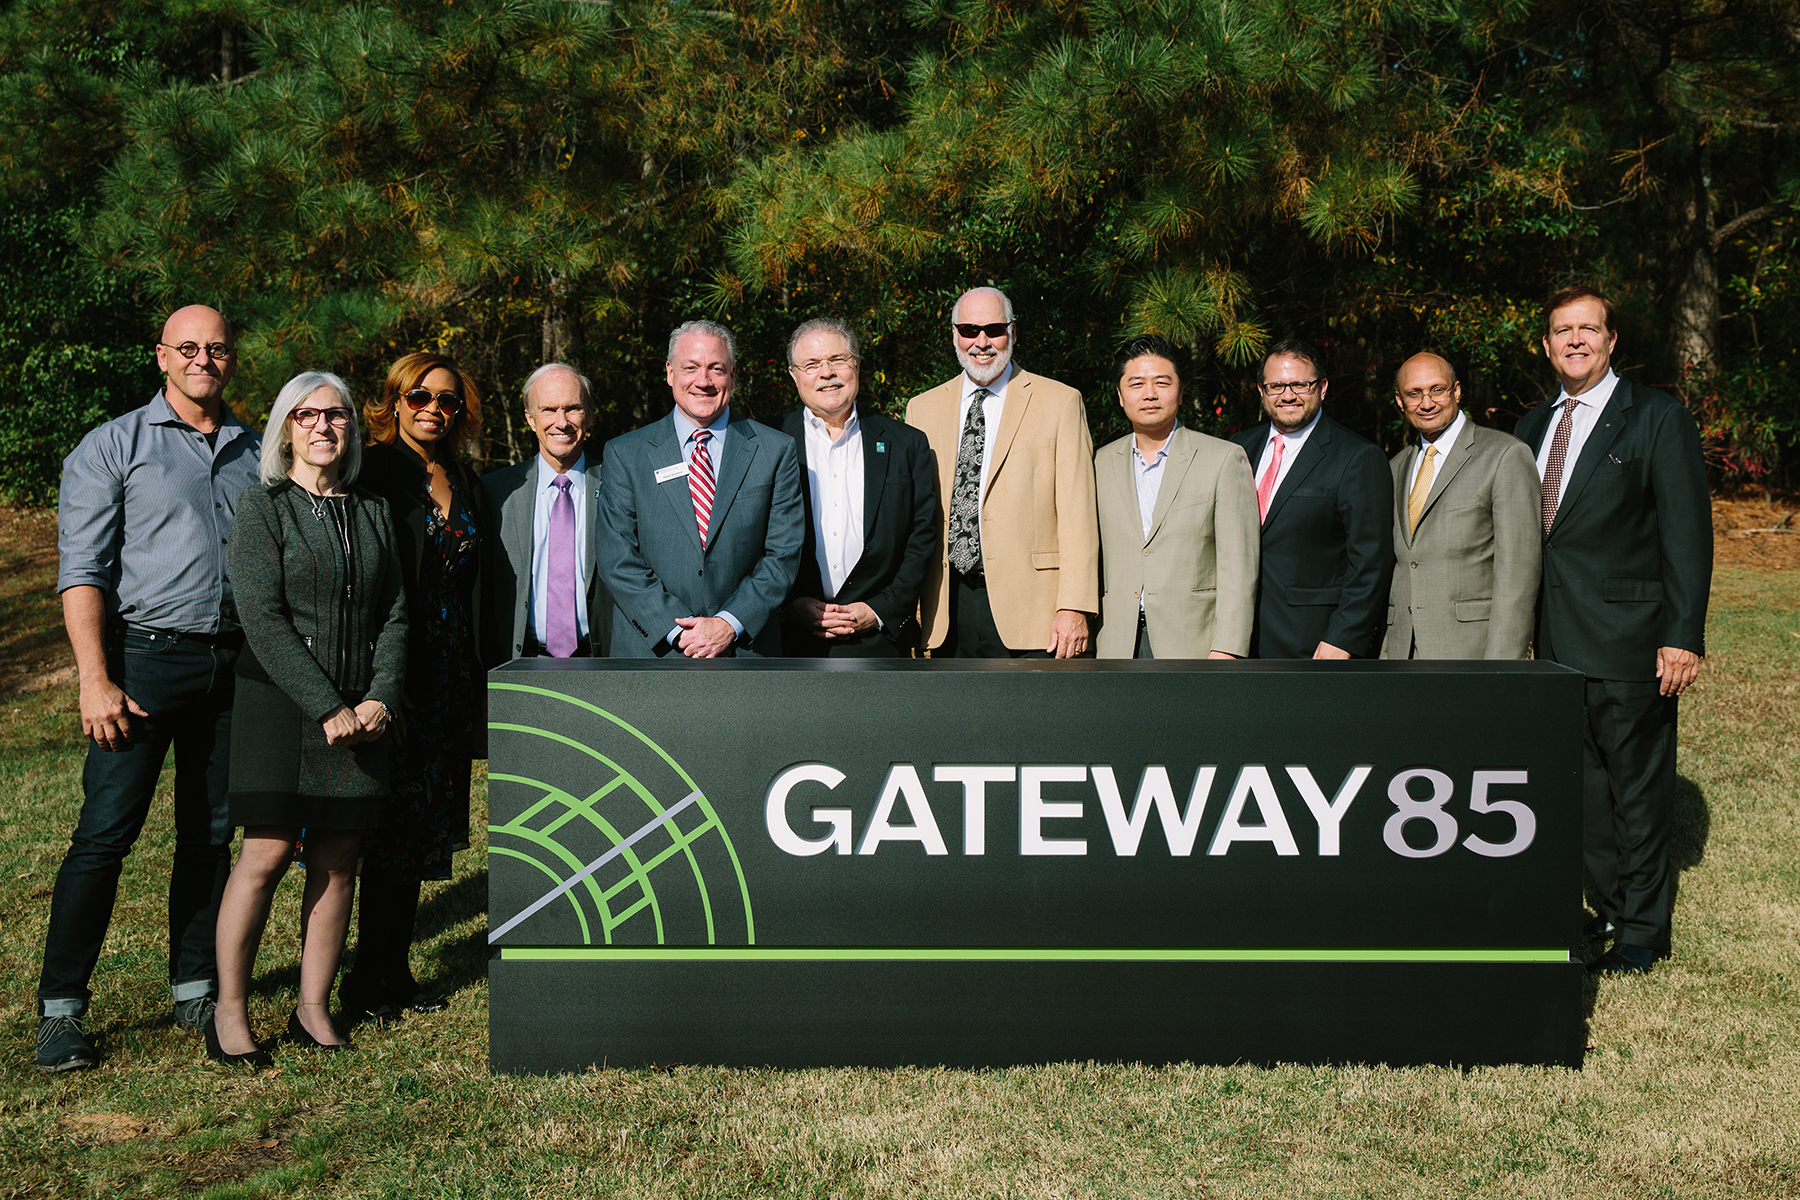 Gateway85 Brand Unveiling Ceremony - Road Sign